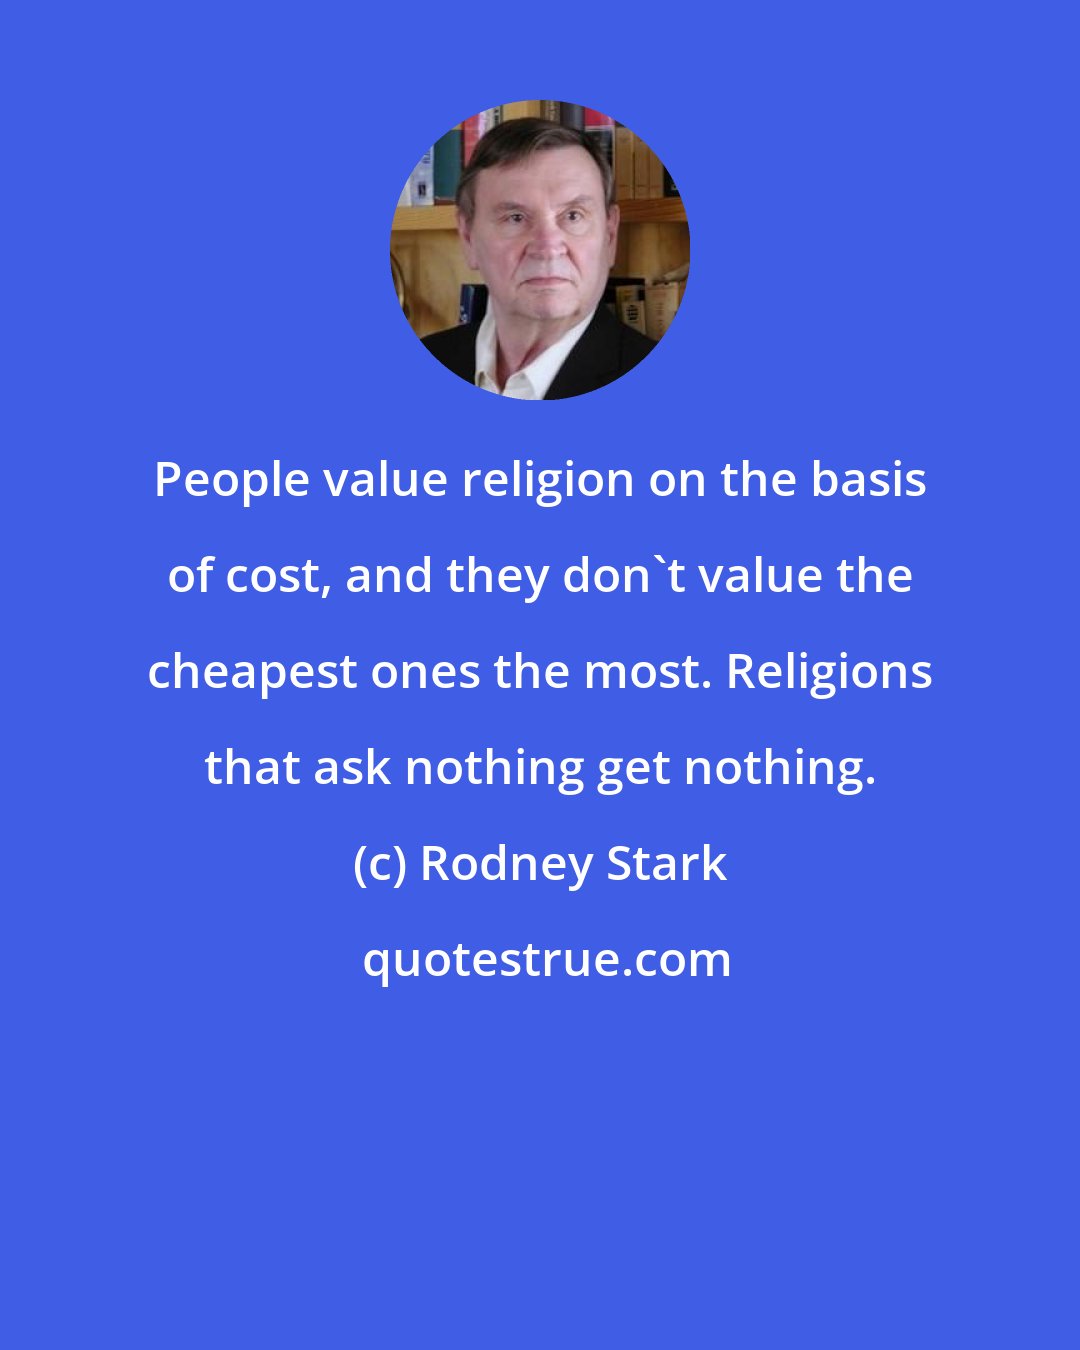 Rodney Stark: People value religion on the basis of cost, and they don't value the cheapest ones the most. Religions that ask nothing get nothing.